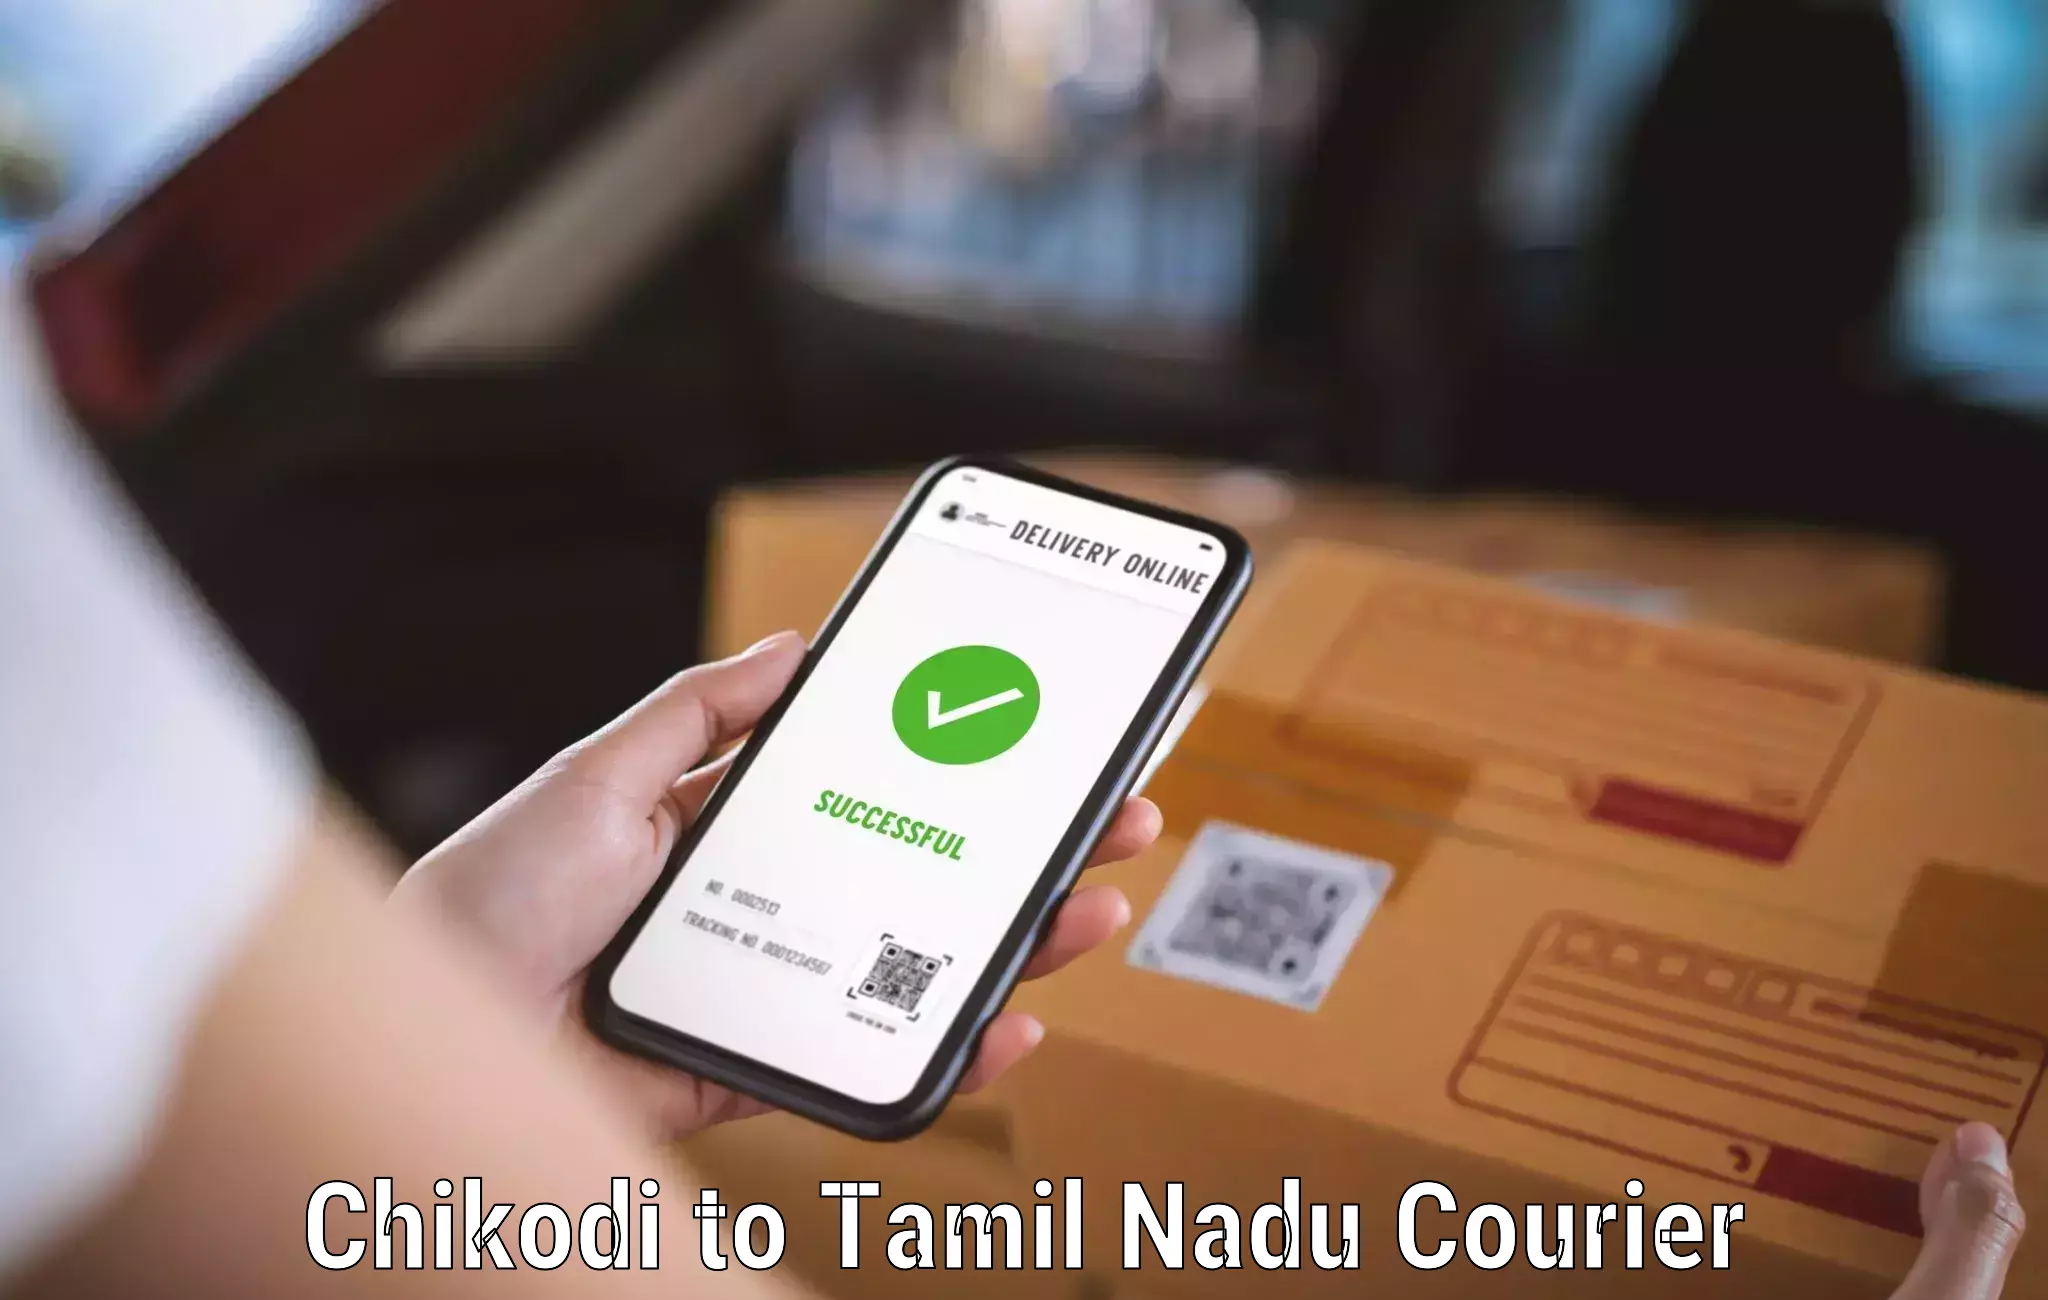 State-of-the-art courier technology Chikodi to Tindivanam